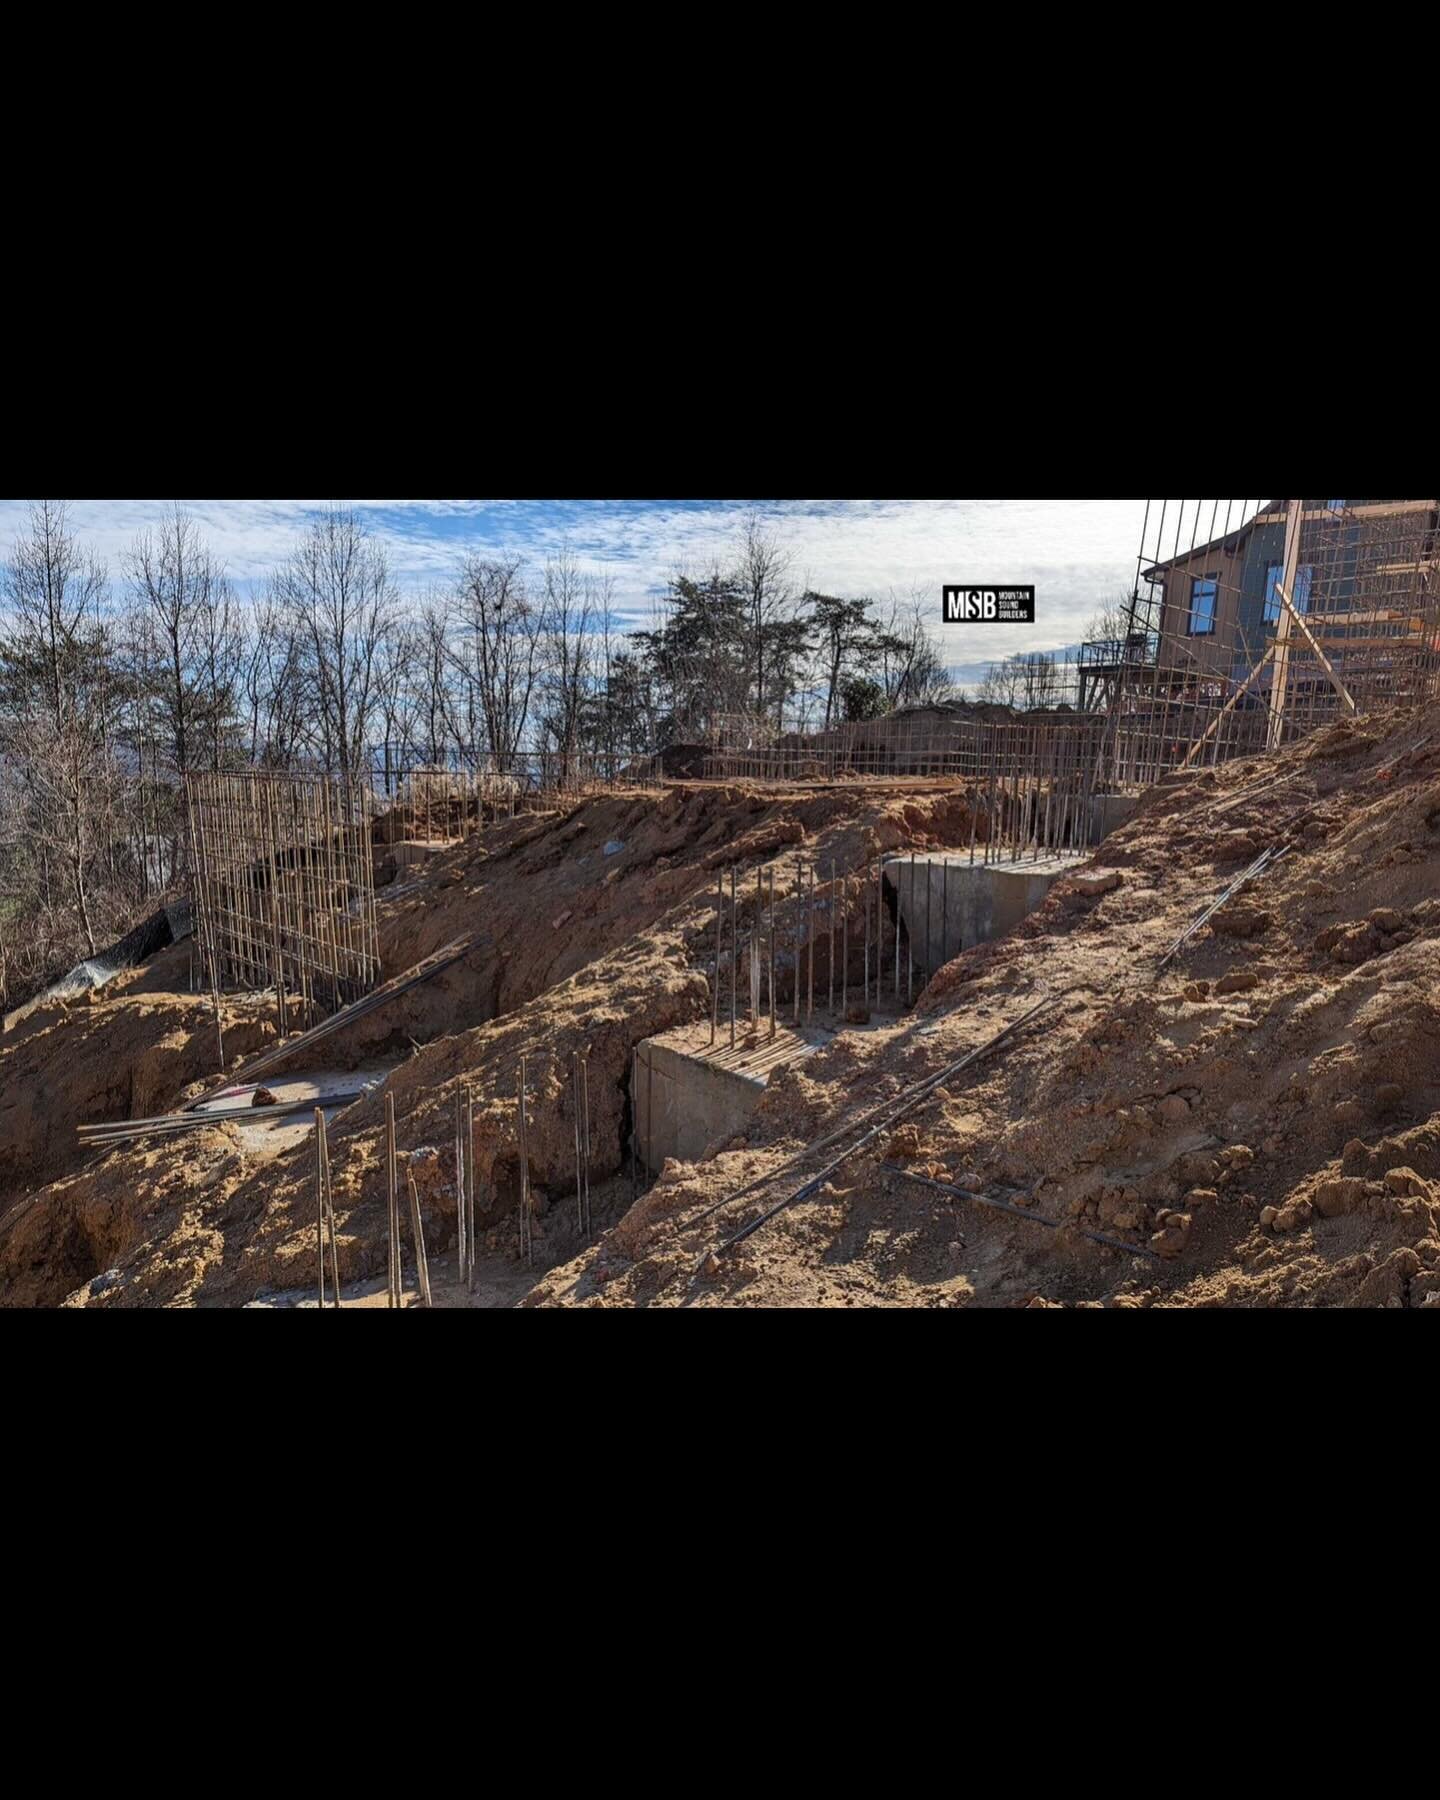 Crazy to think of the transformation that will happen that this crazy foundation will become this amazing house on Reynolds mountain!! @augustinteriors @mountainsoundbuilders @shamburgerarchitecture @emilysek